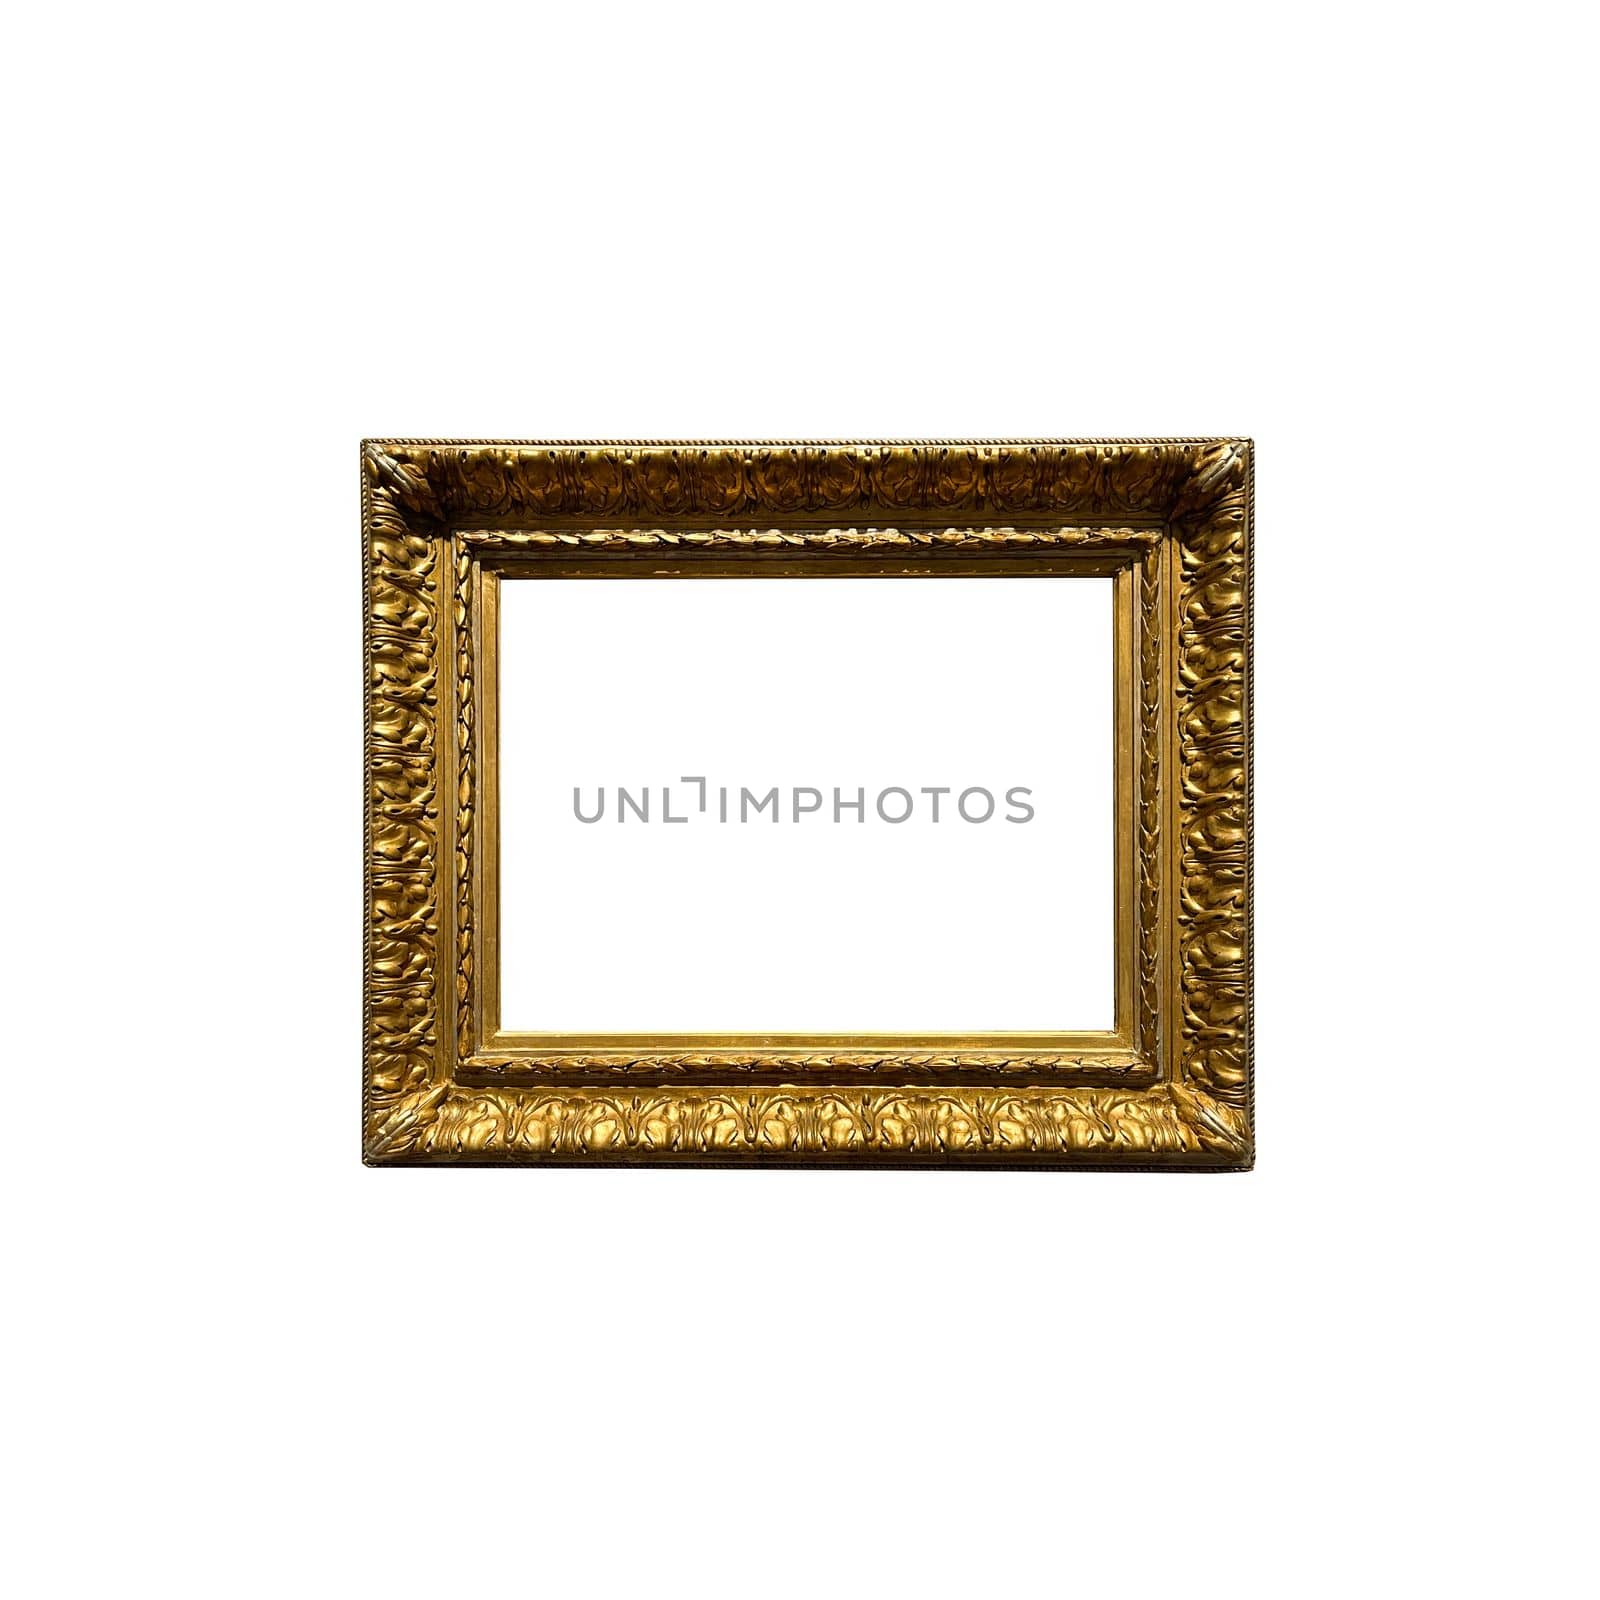 Home decor and interior design, antique golden art gallery frame isolated on white background, furniture and decoration detail